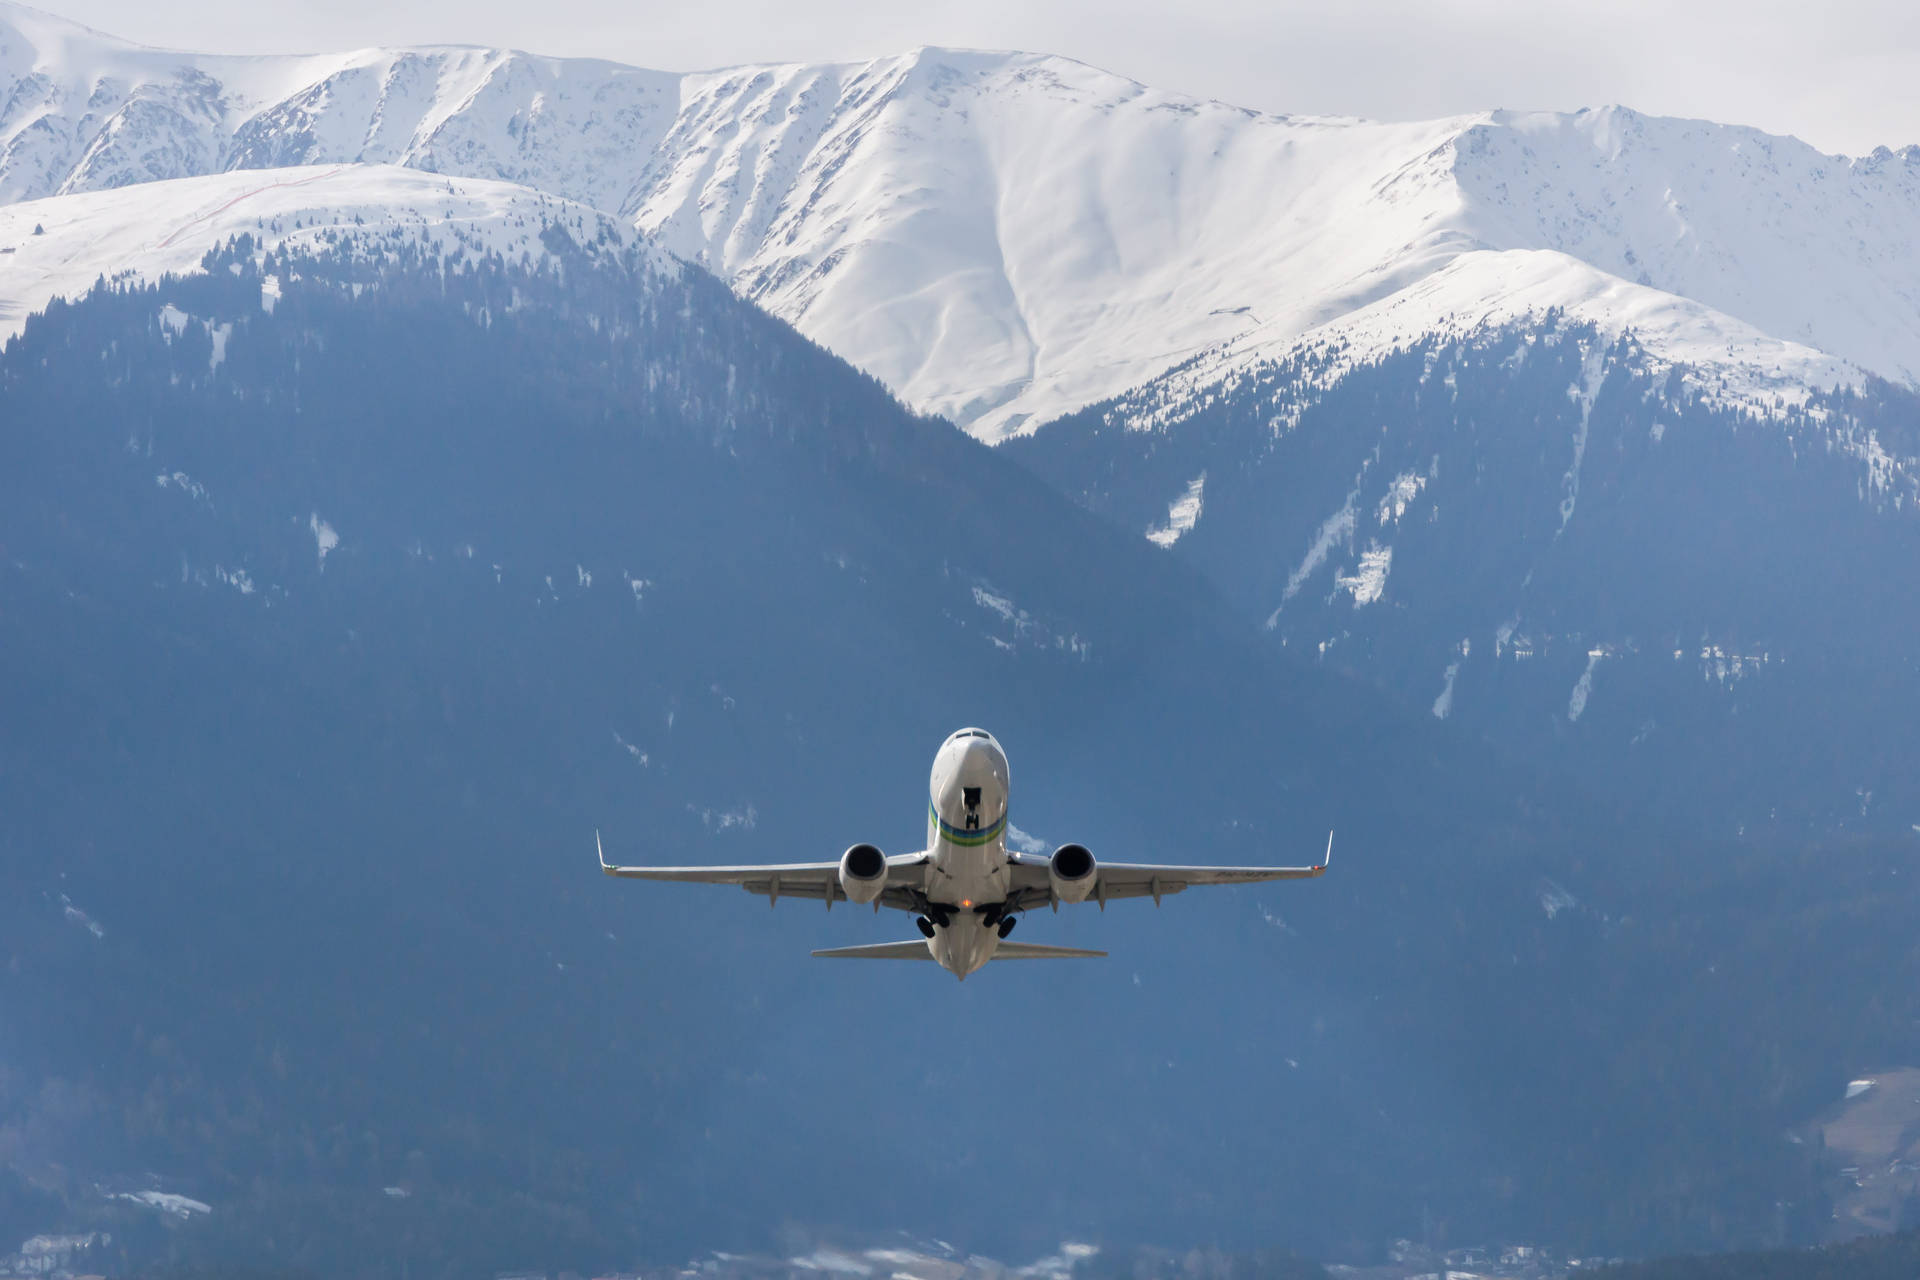 Hd Plane Flying Snowy Mountains Background